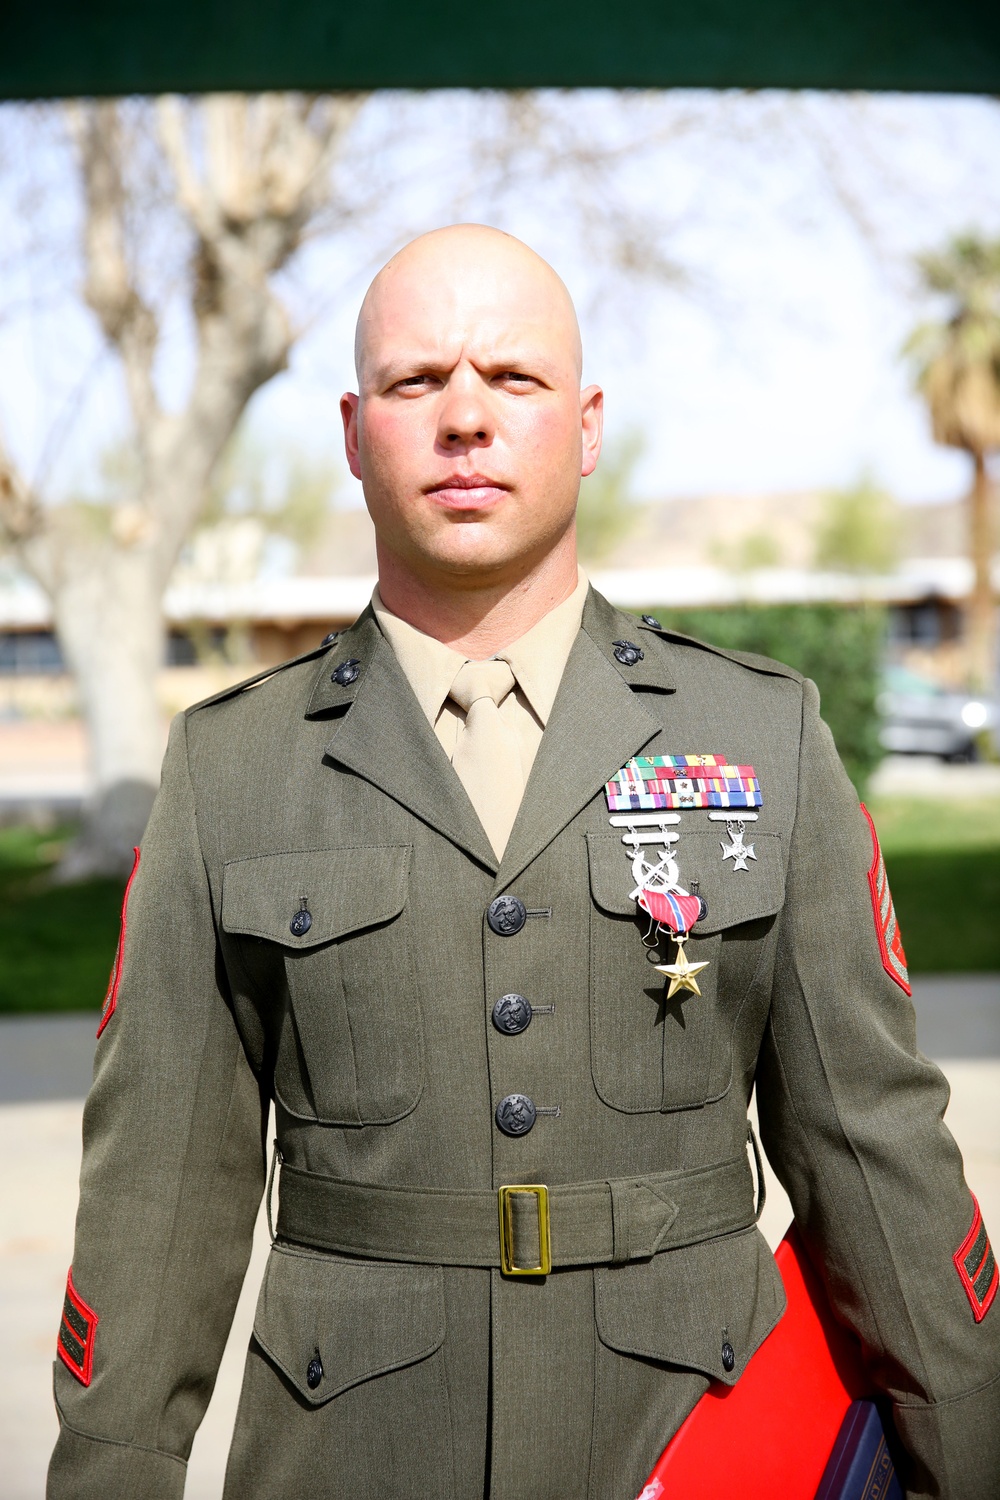 DVIDS News - Marine awarded Bronze Star Medal for actions six operation